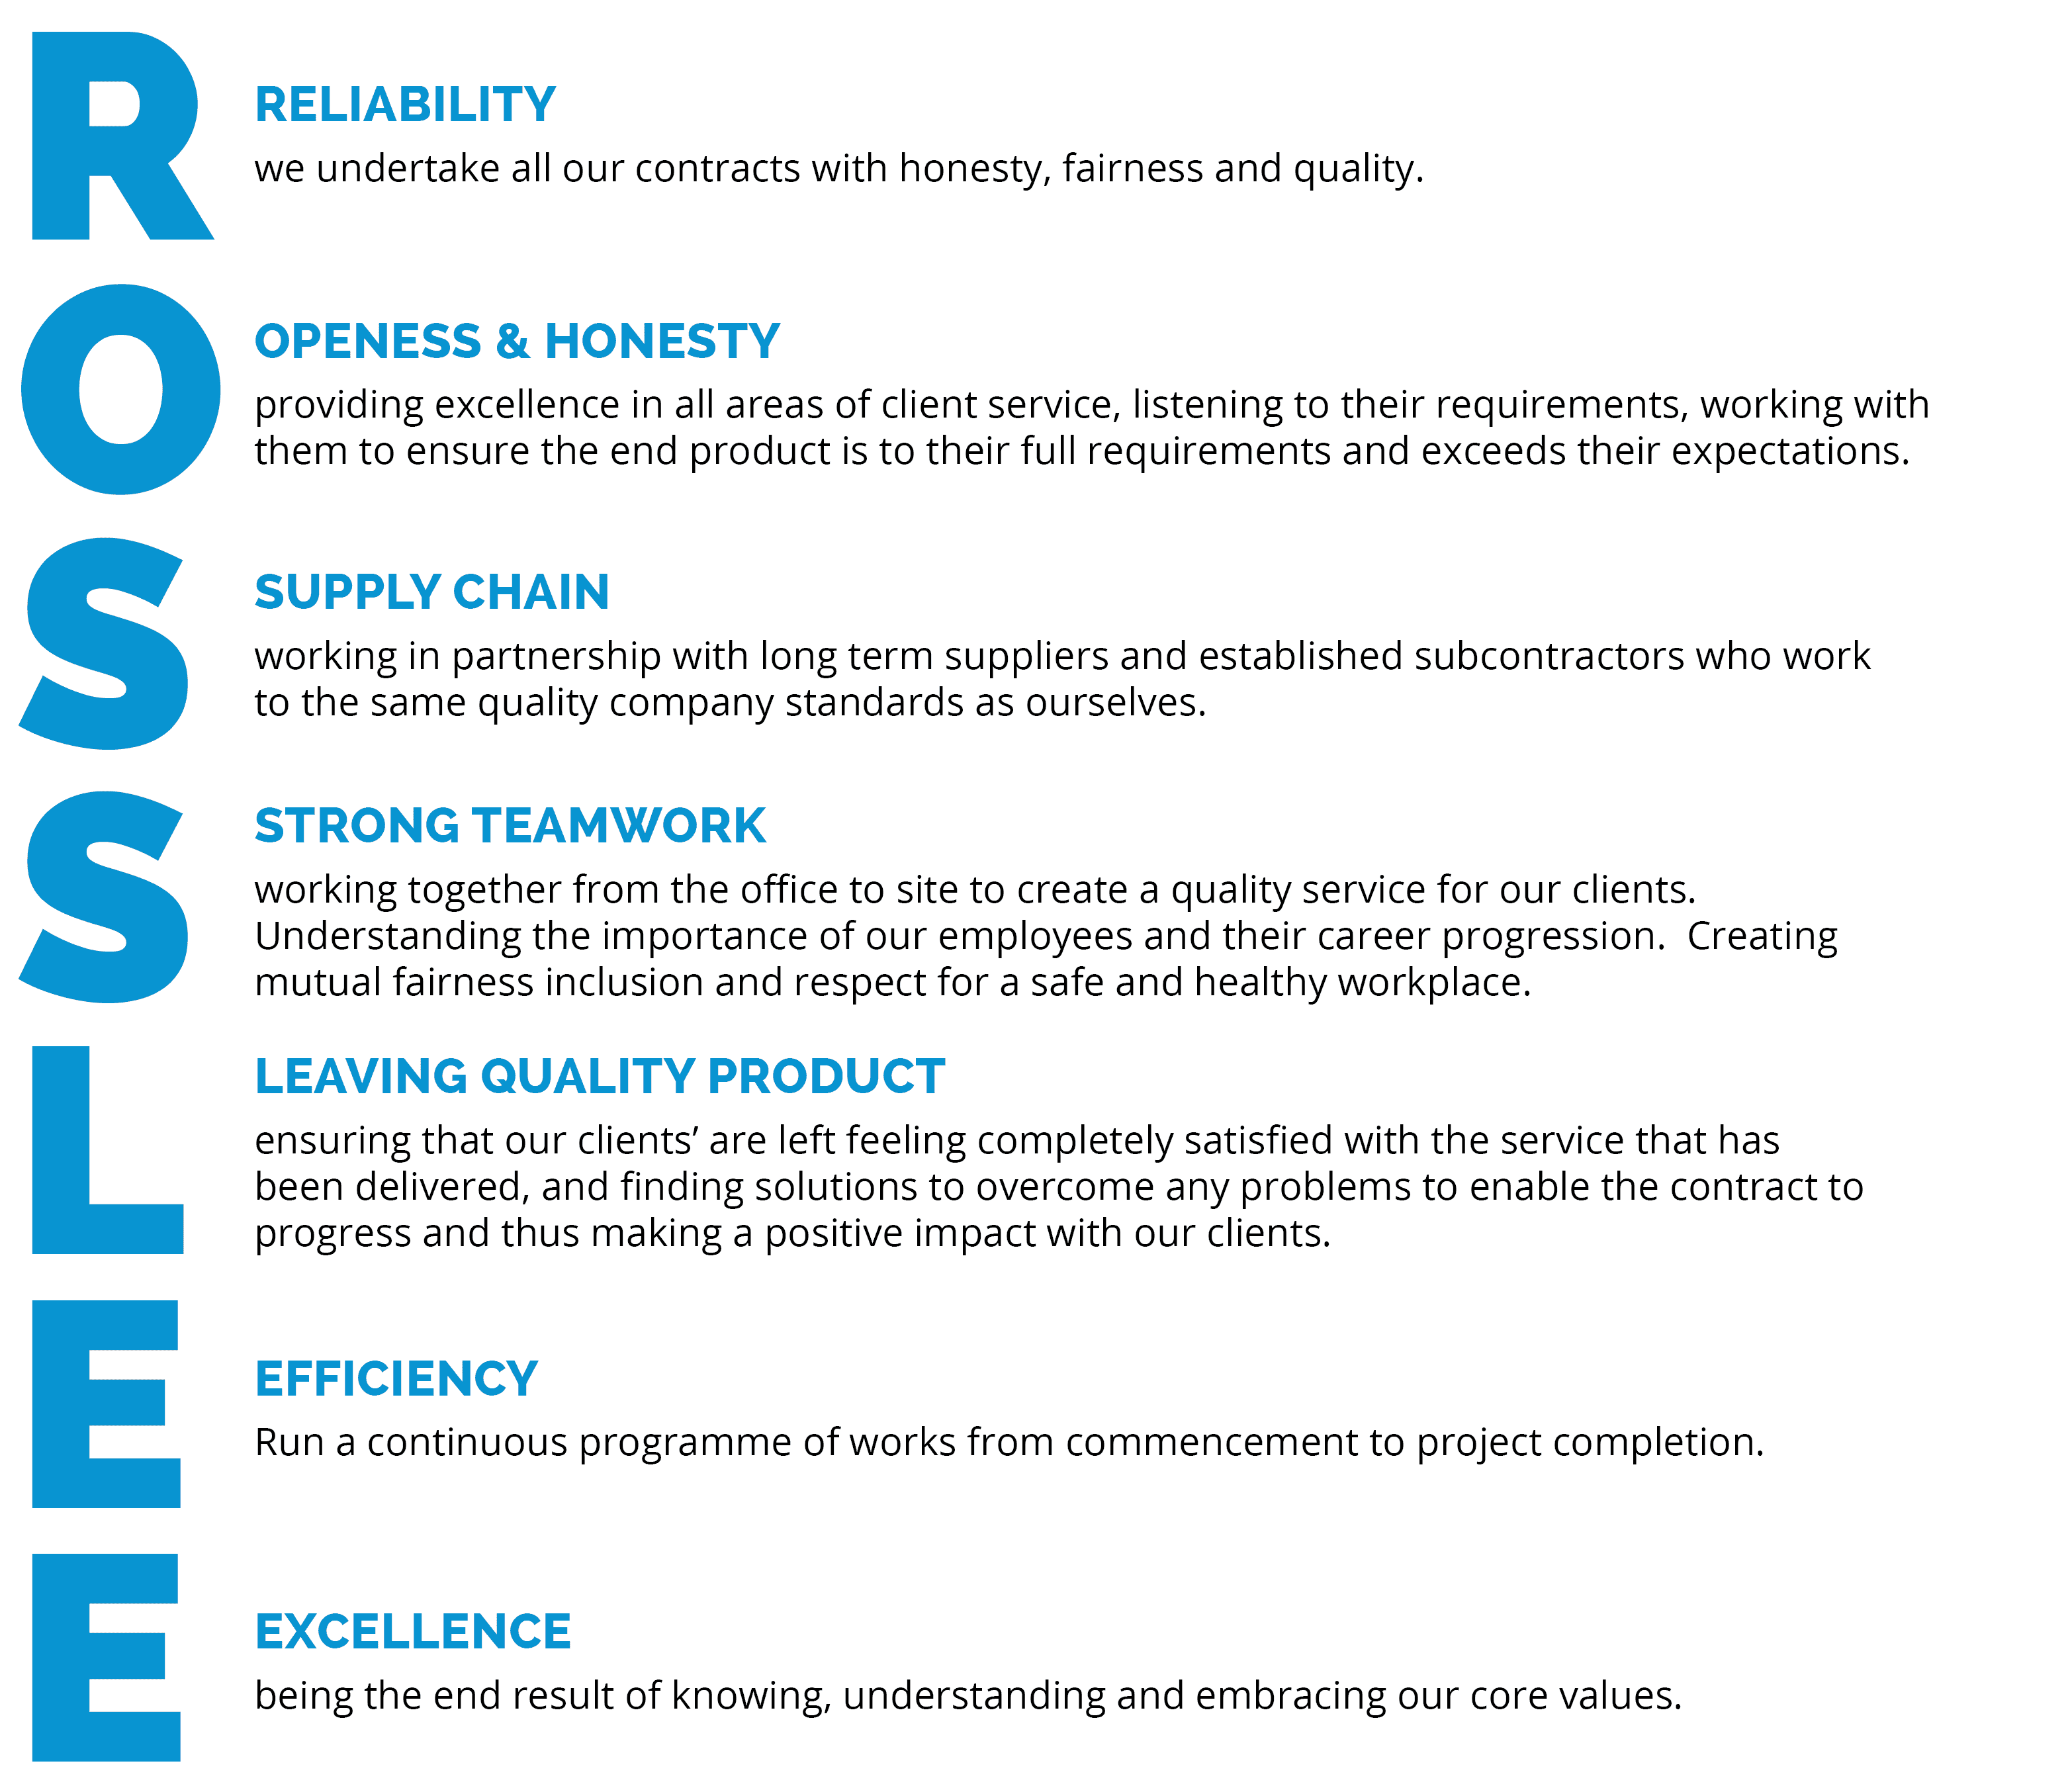 Rosslee Construction - Core Values